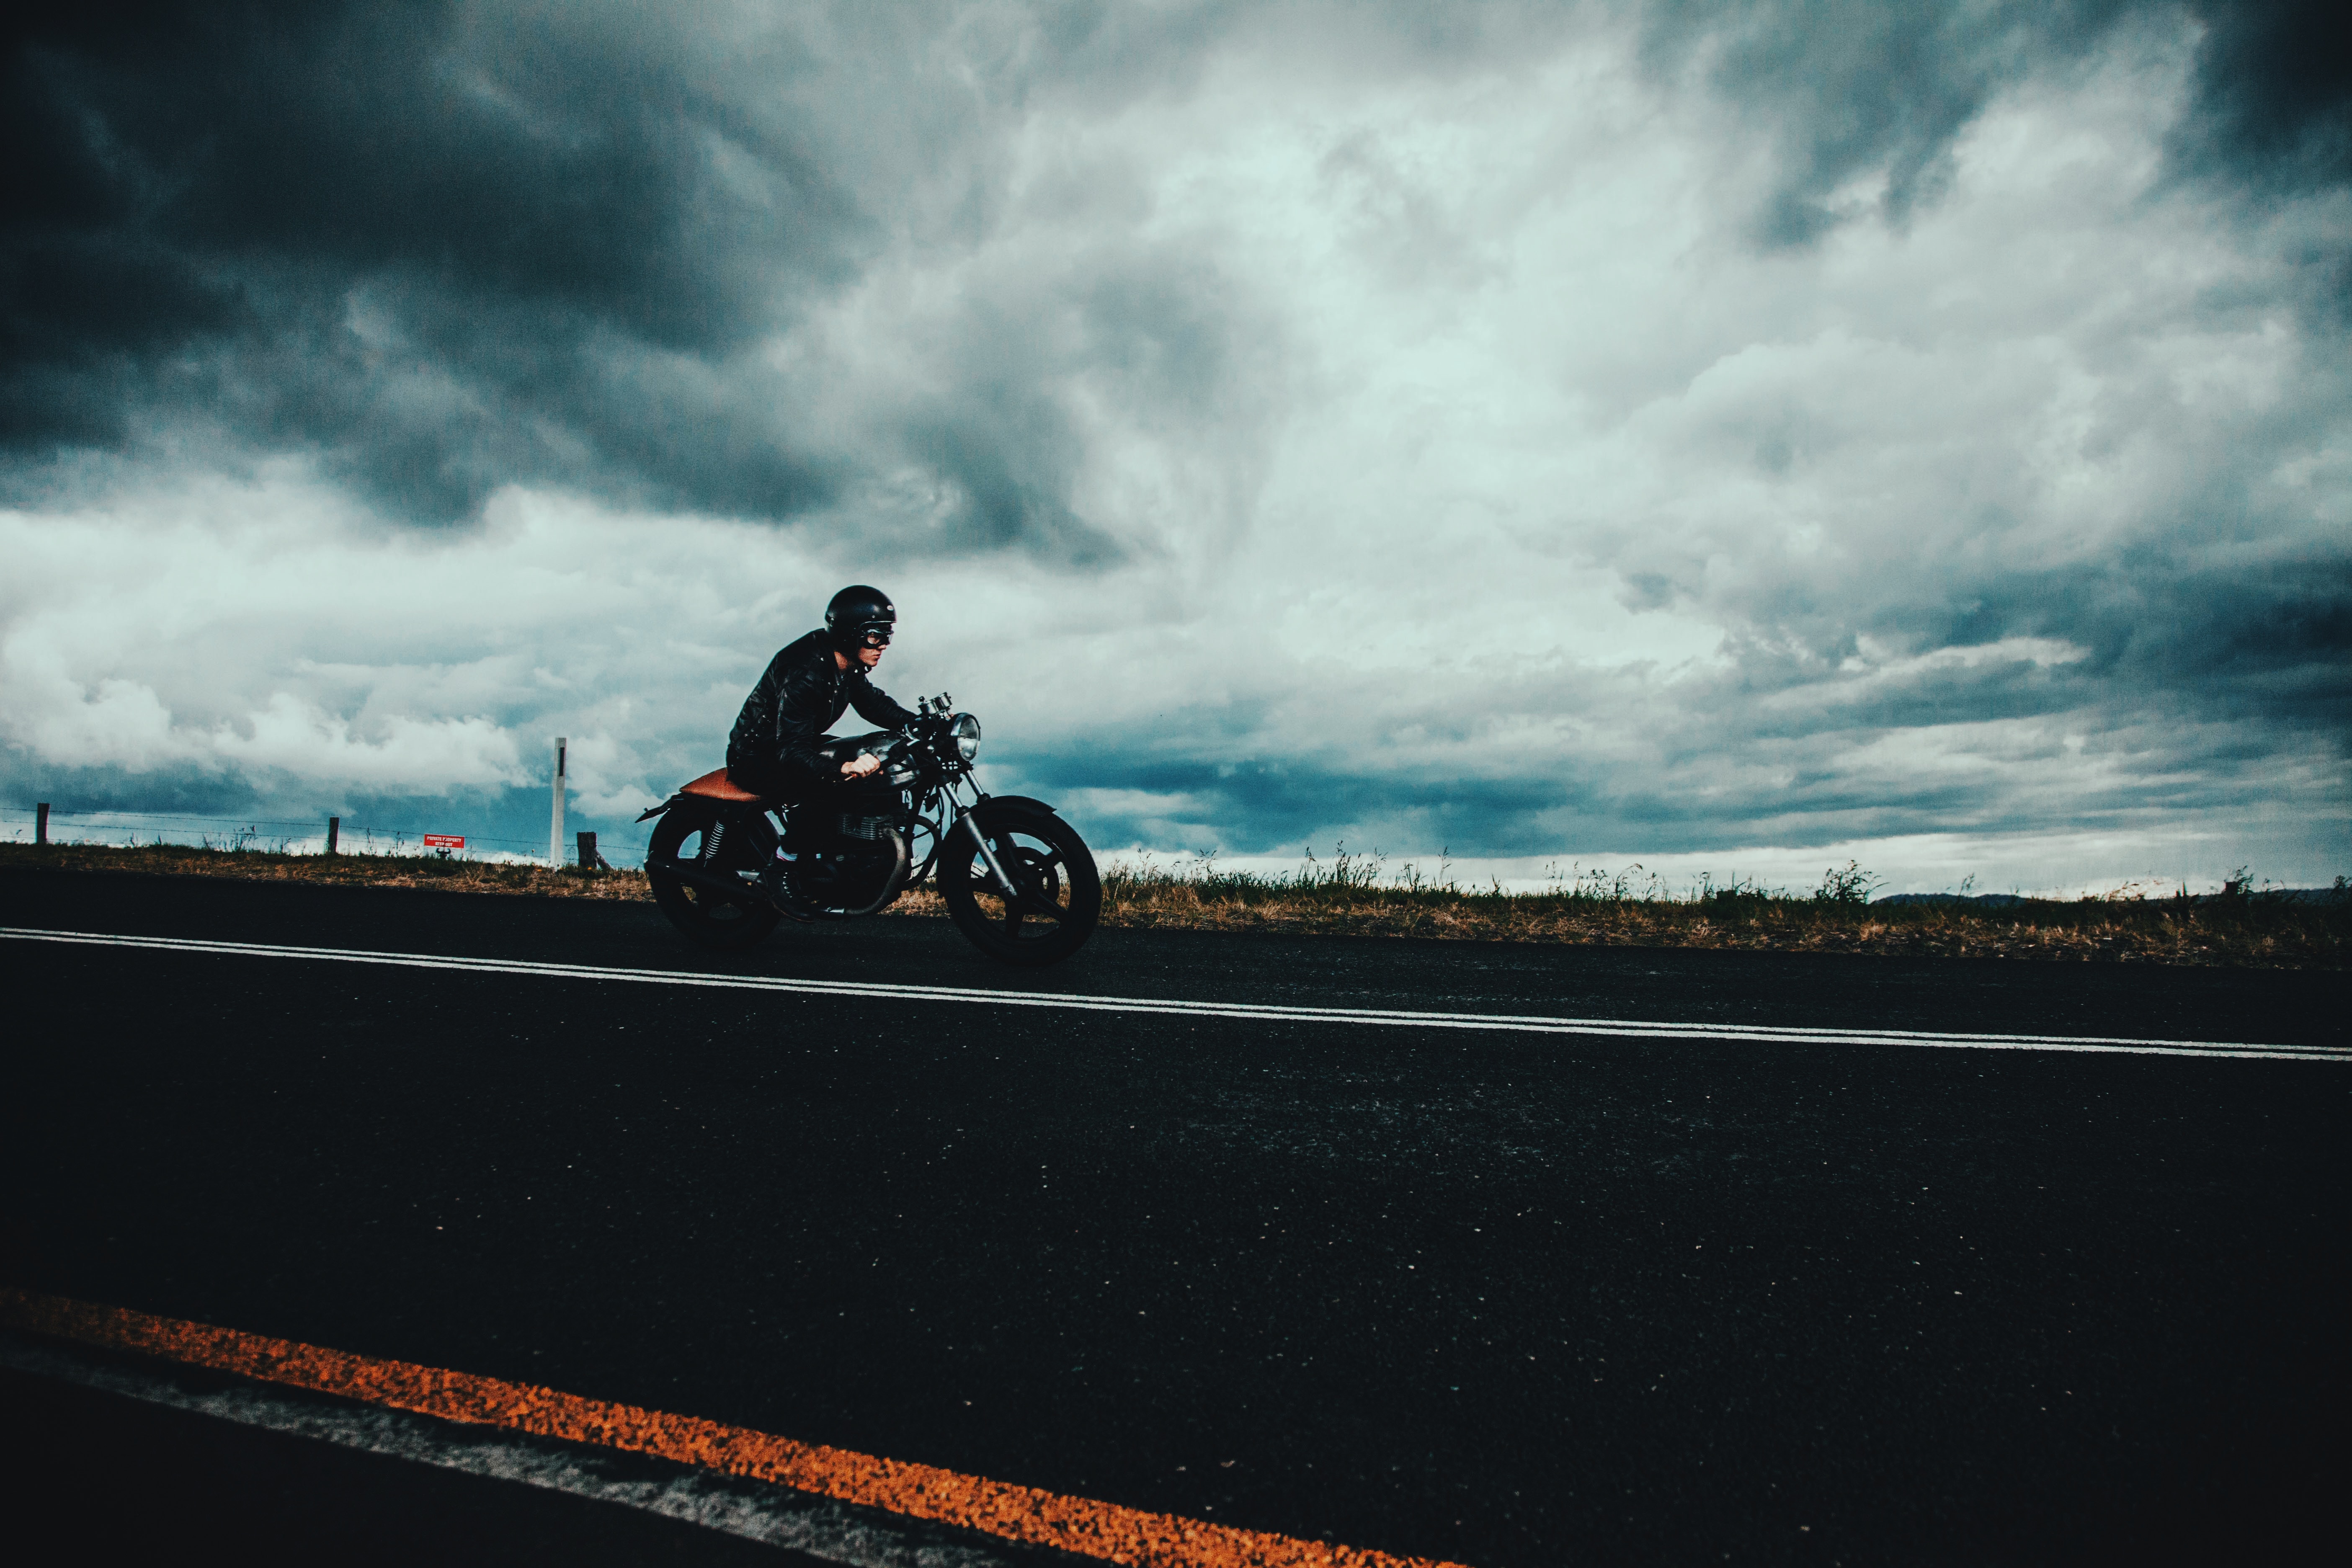 motorcyclist, overcast, motorcycles, road, mainly cloudy, markup, helmet, asphalt, clouds wallpapers for tablet